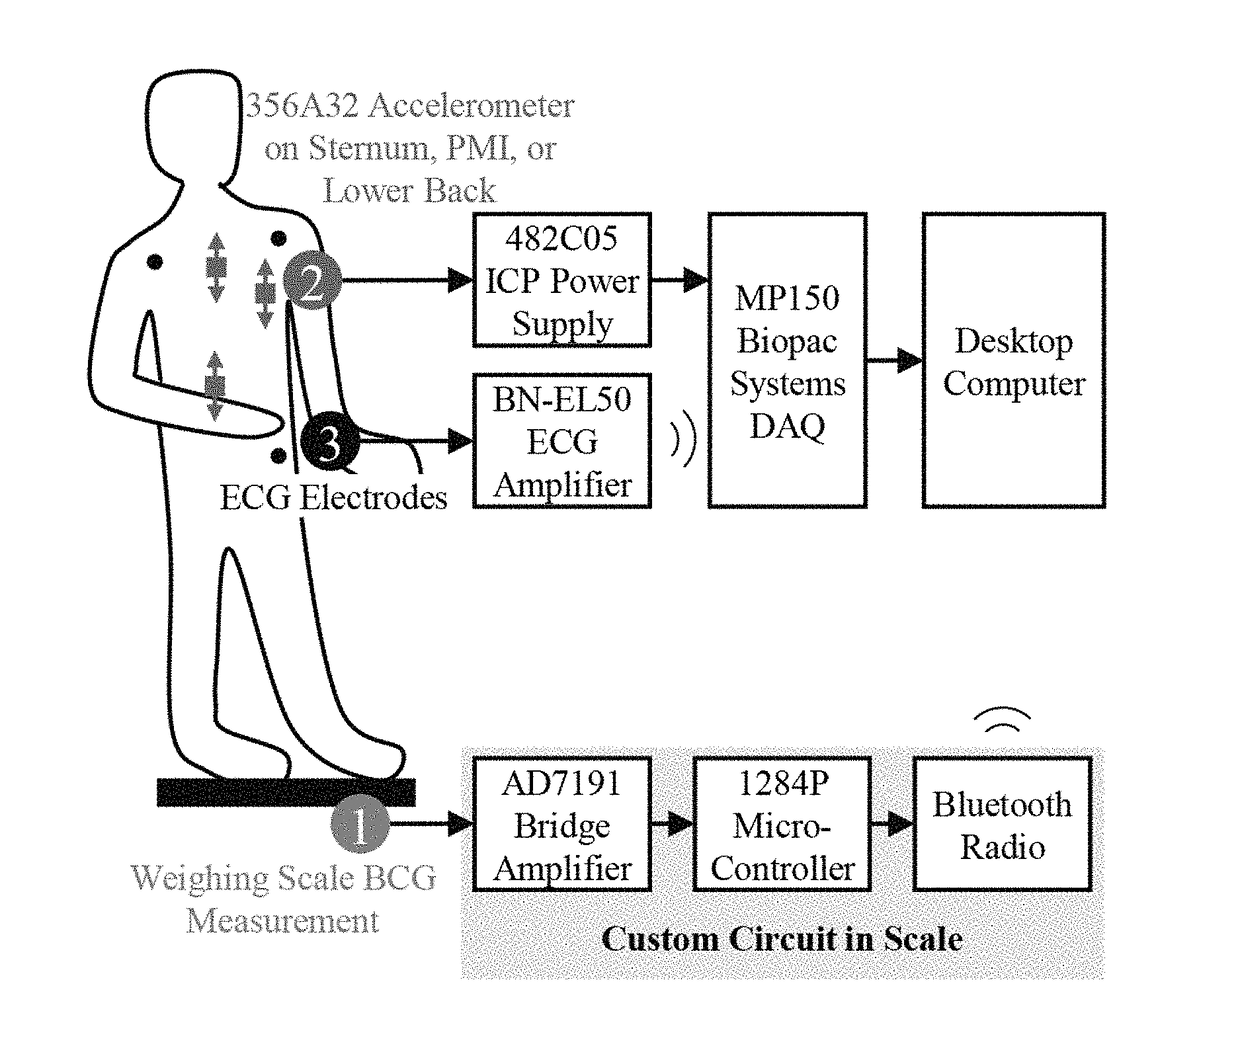 Noninvasive Systems And Methods For Monitoring Health Characteristics